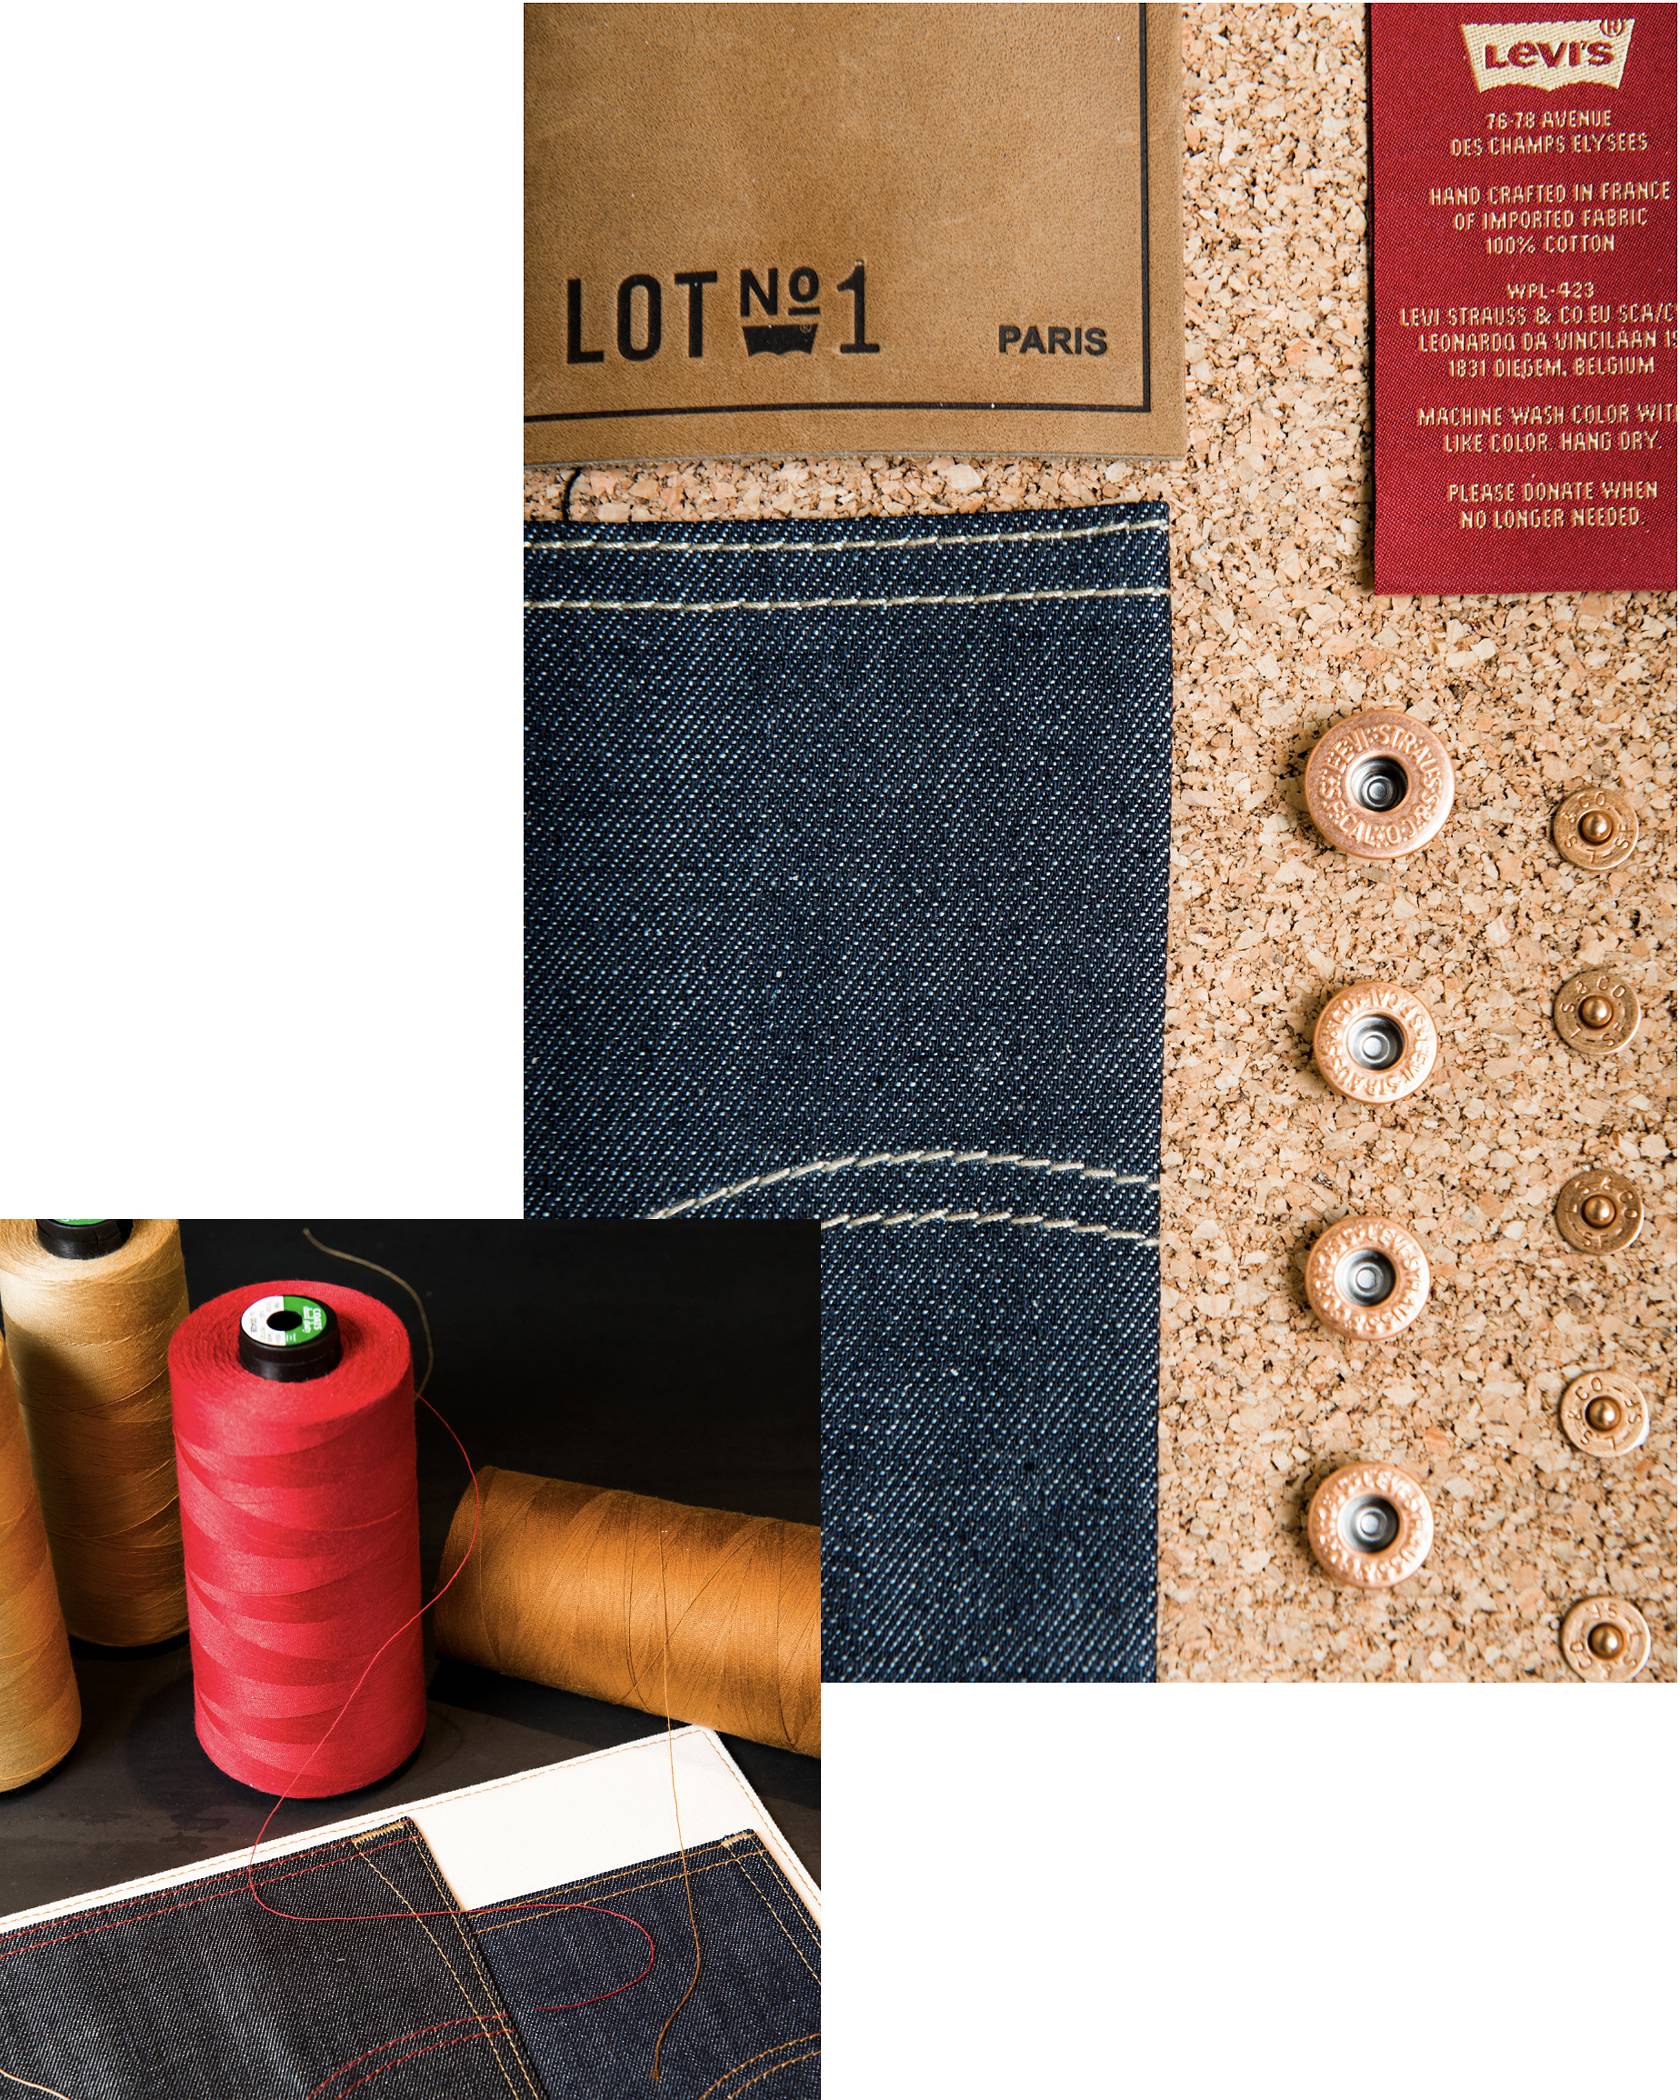 Denim pieces, threads, leather patches, rivets, buttons, pockets.